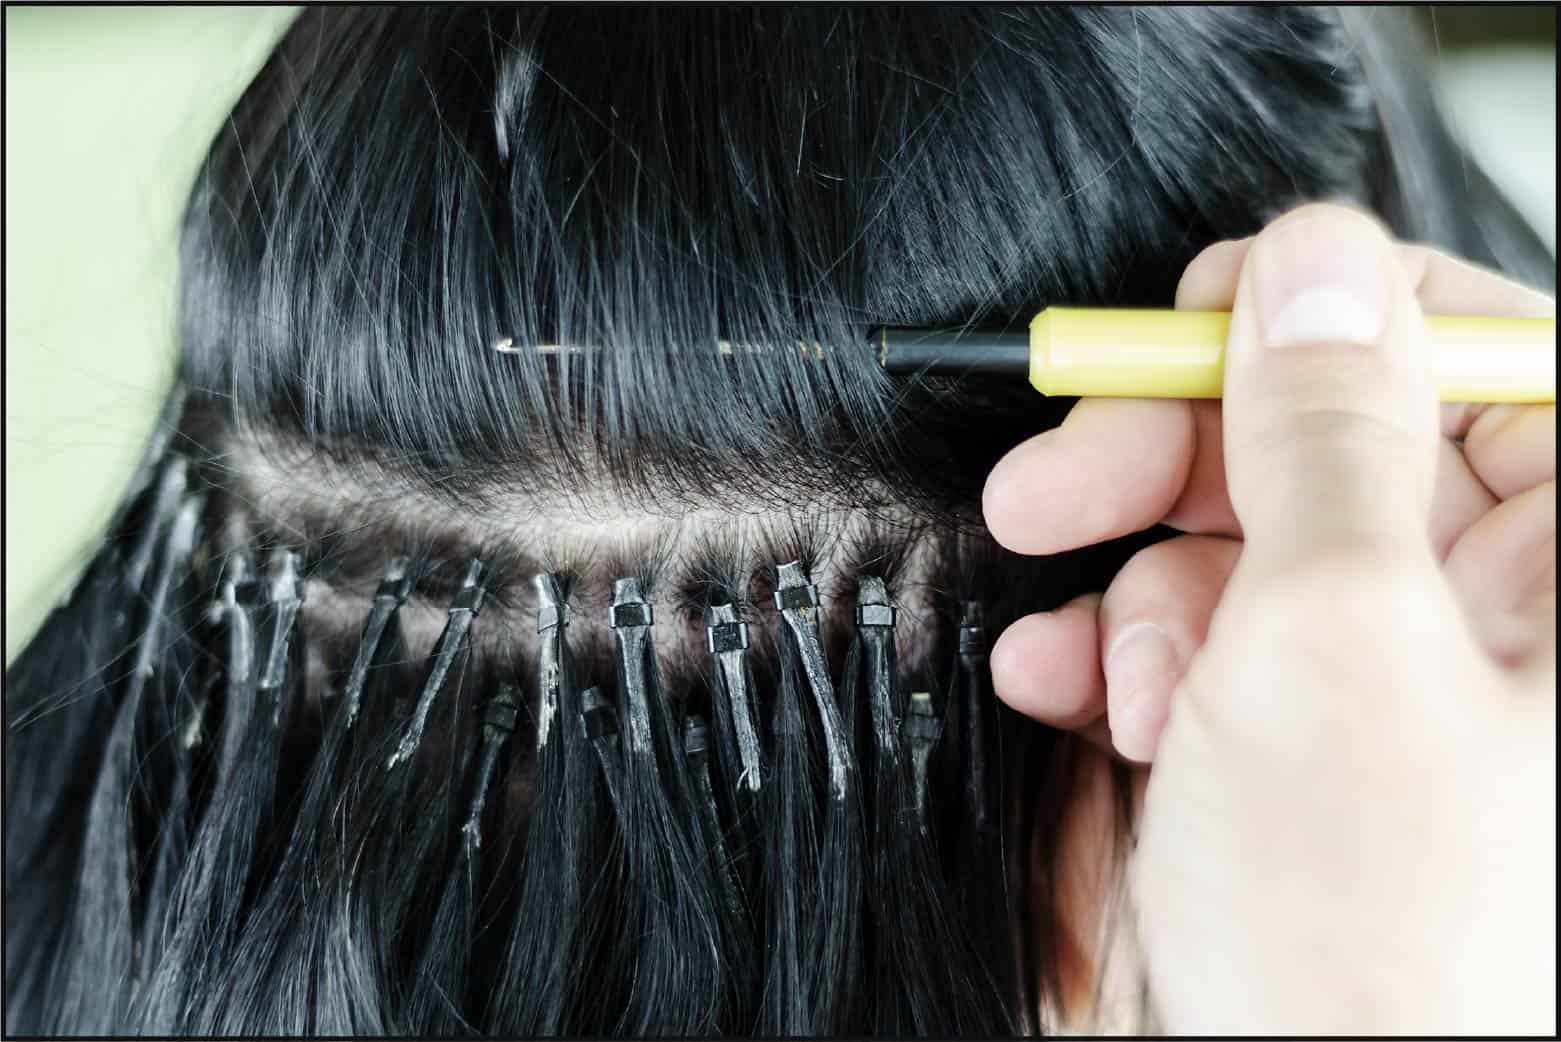 How Do Hair Extensions Work? - StyleSeat